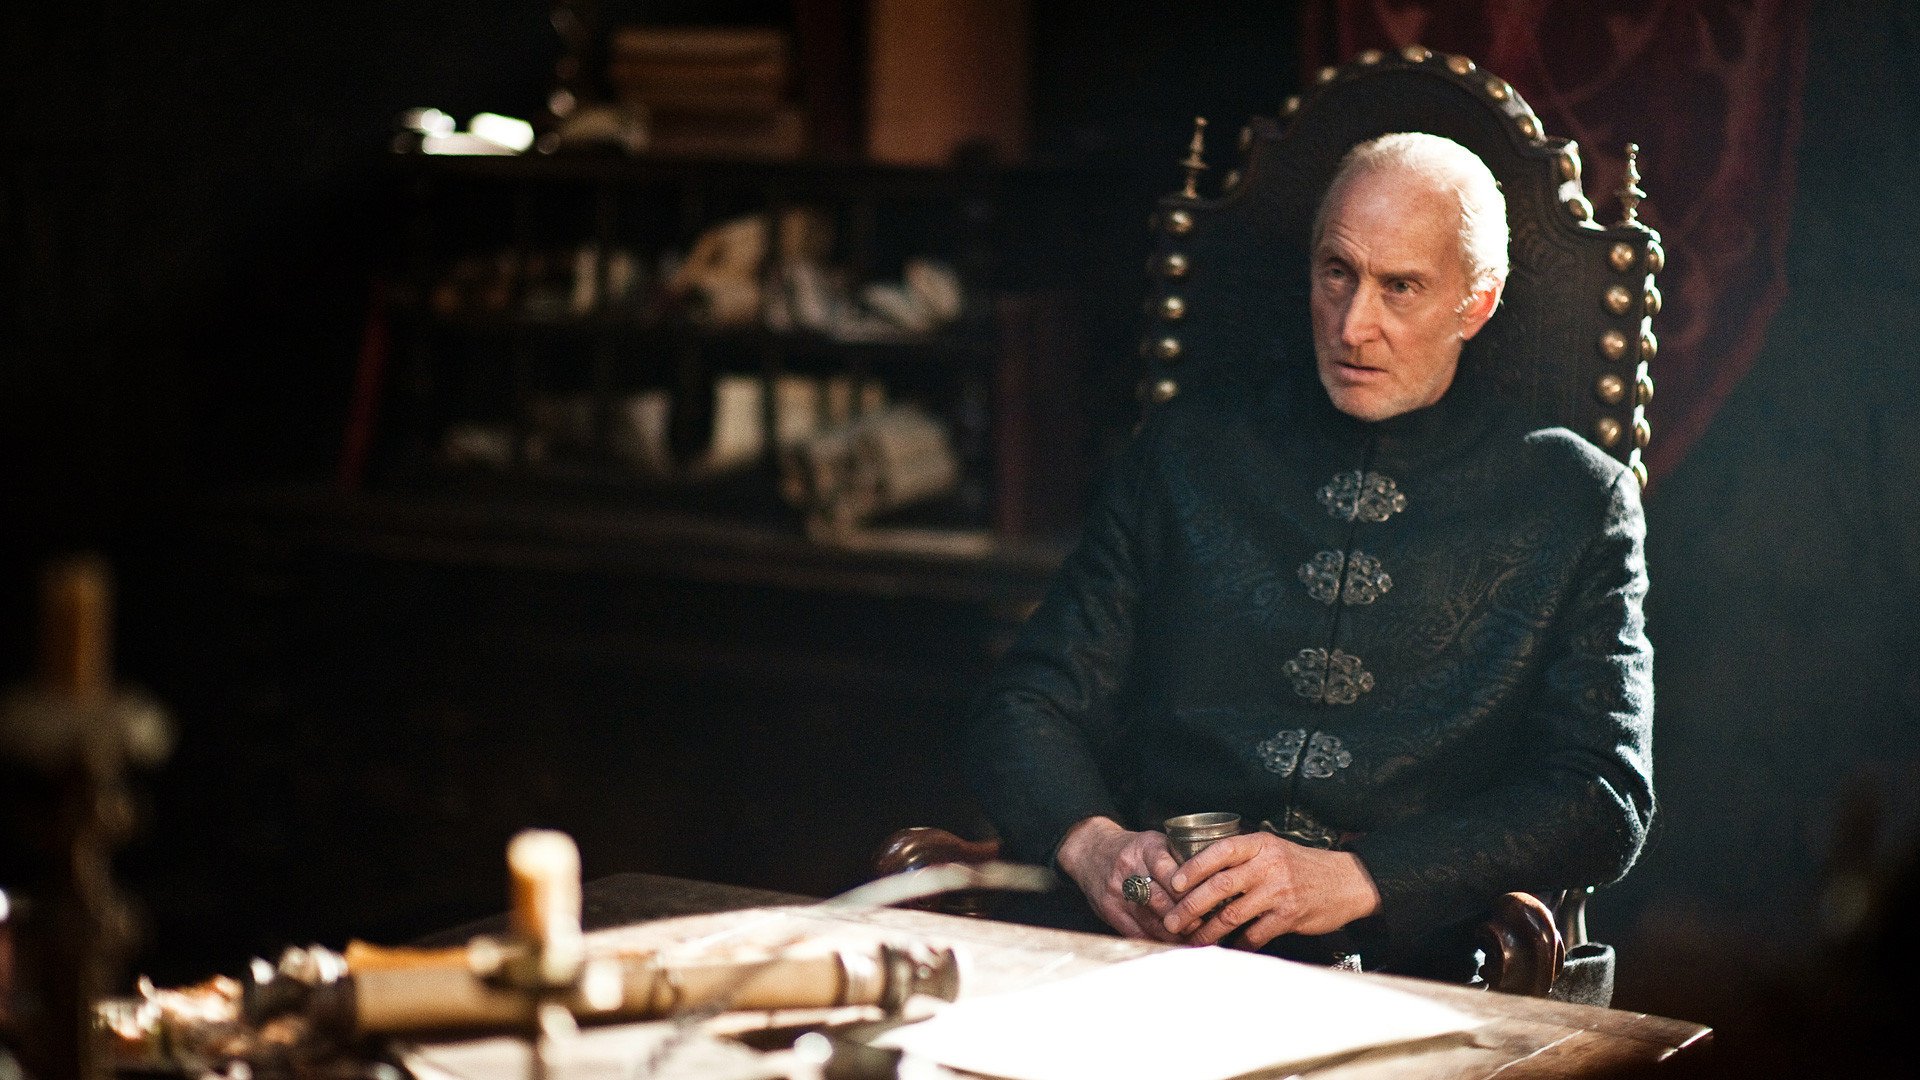 tv show, game of thrones, charles dance, tywin lannister